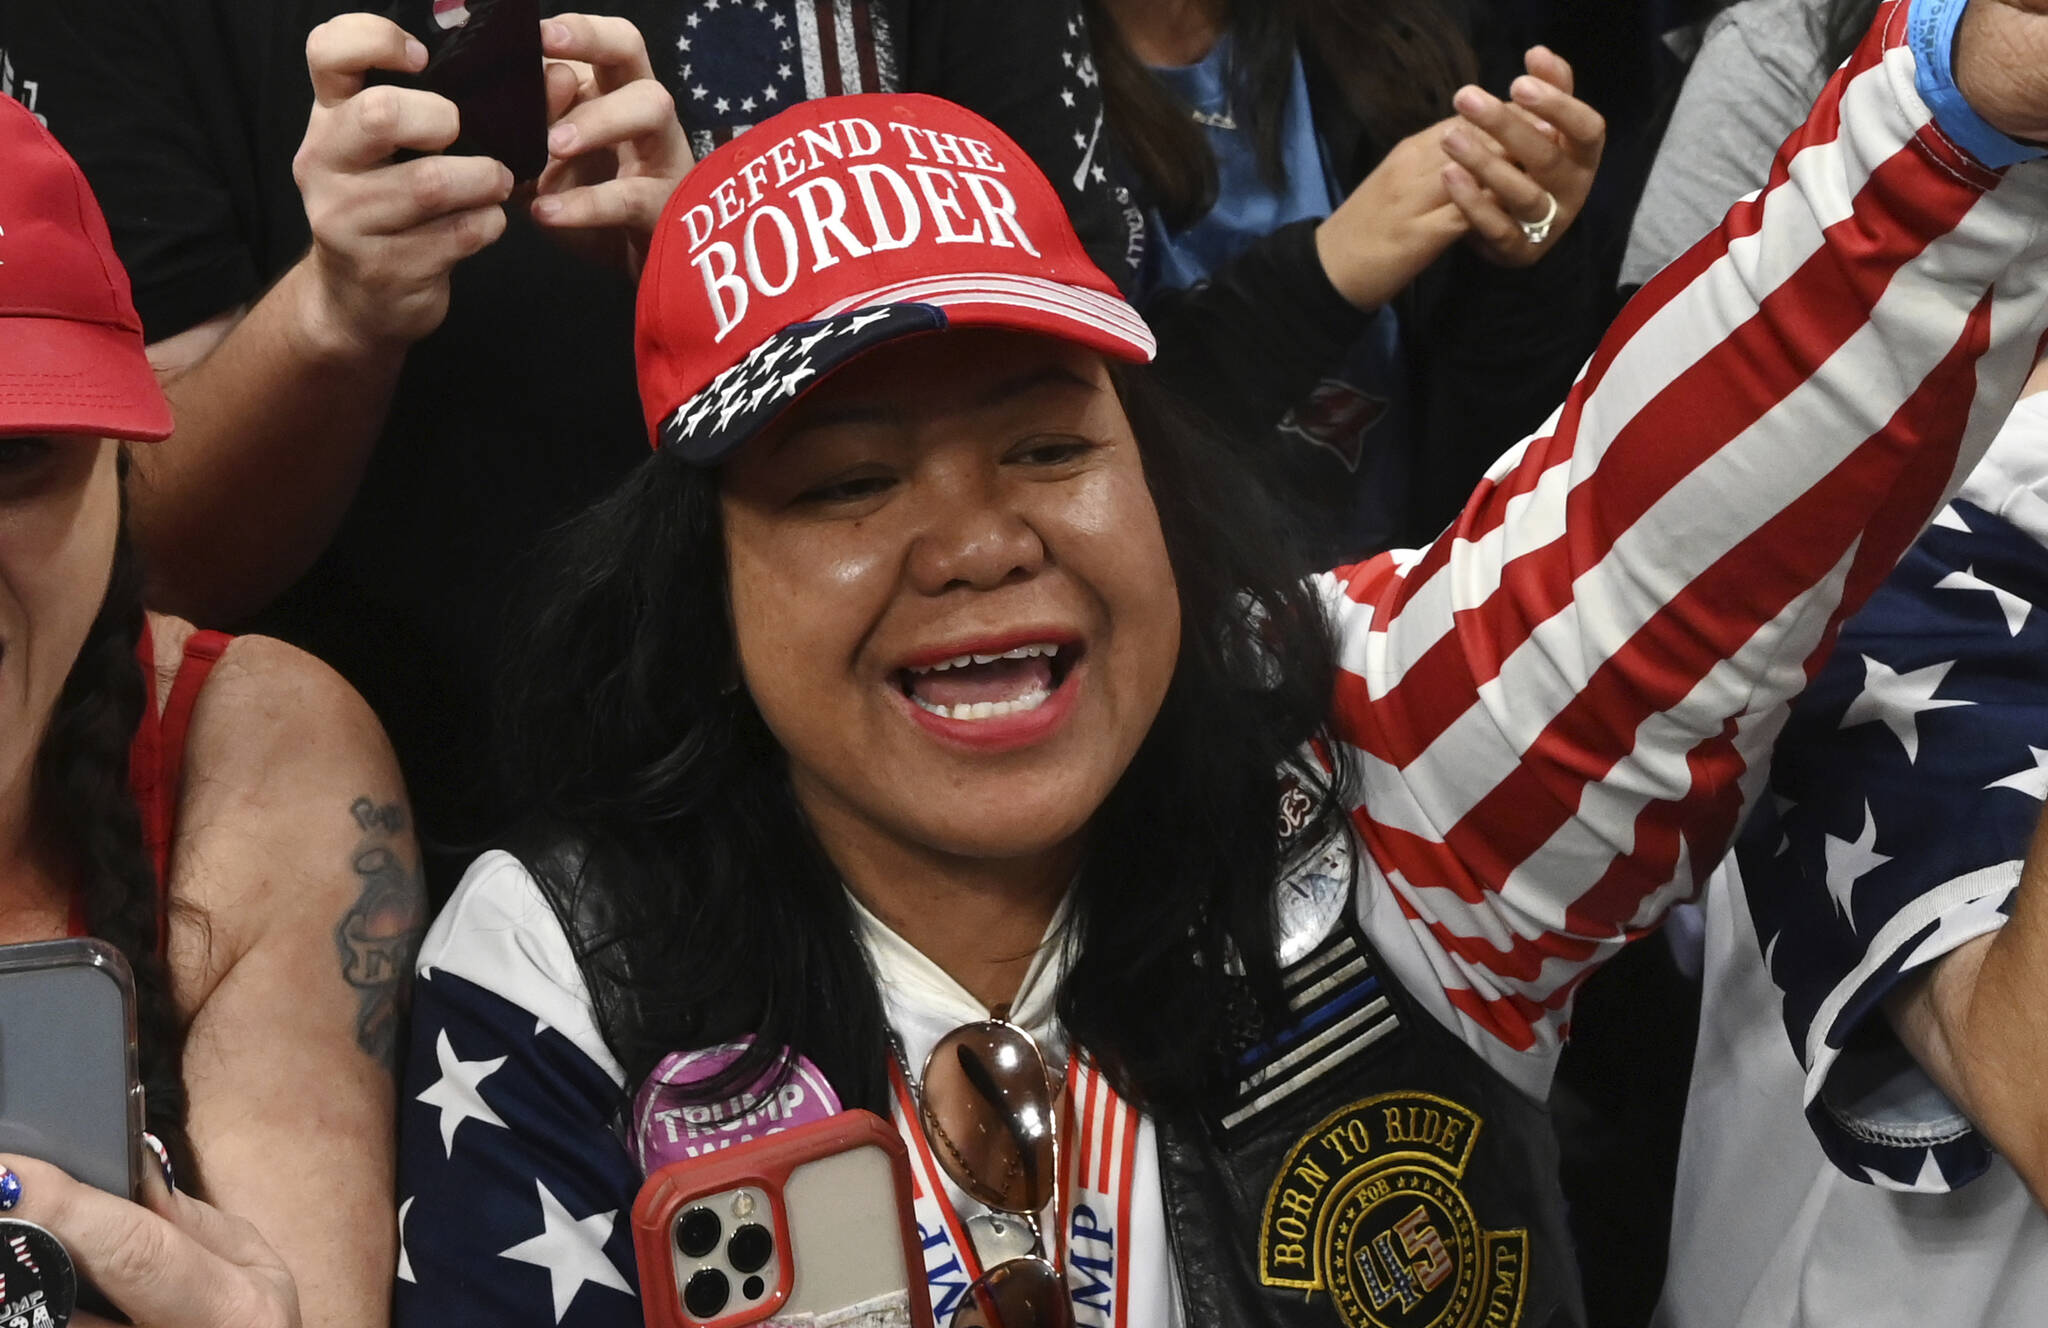 Mimi Israelah, center, cheers for Donald Trump inside the Alaska Airlines Center in Anchorage, Alaska, during a rally Saturday July 9, 2022. Two Anchorage police officers violated department policy during a traffic stop last month when Israelah, in town for a rally by former President Donald Trump showed a “white privilege card” instead of a driver’s license and was not ticketed. (Bill Roth/Anchorage Daily News via AP, File)